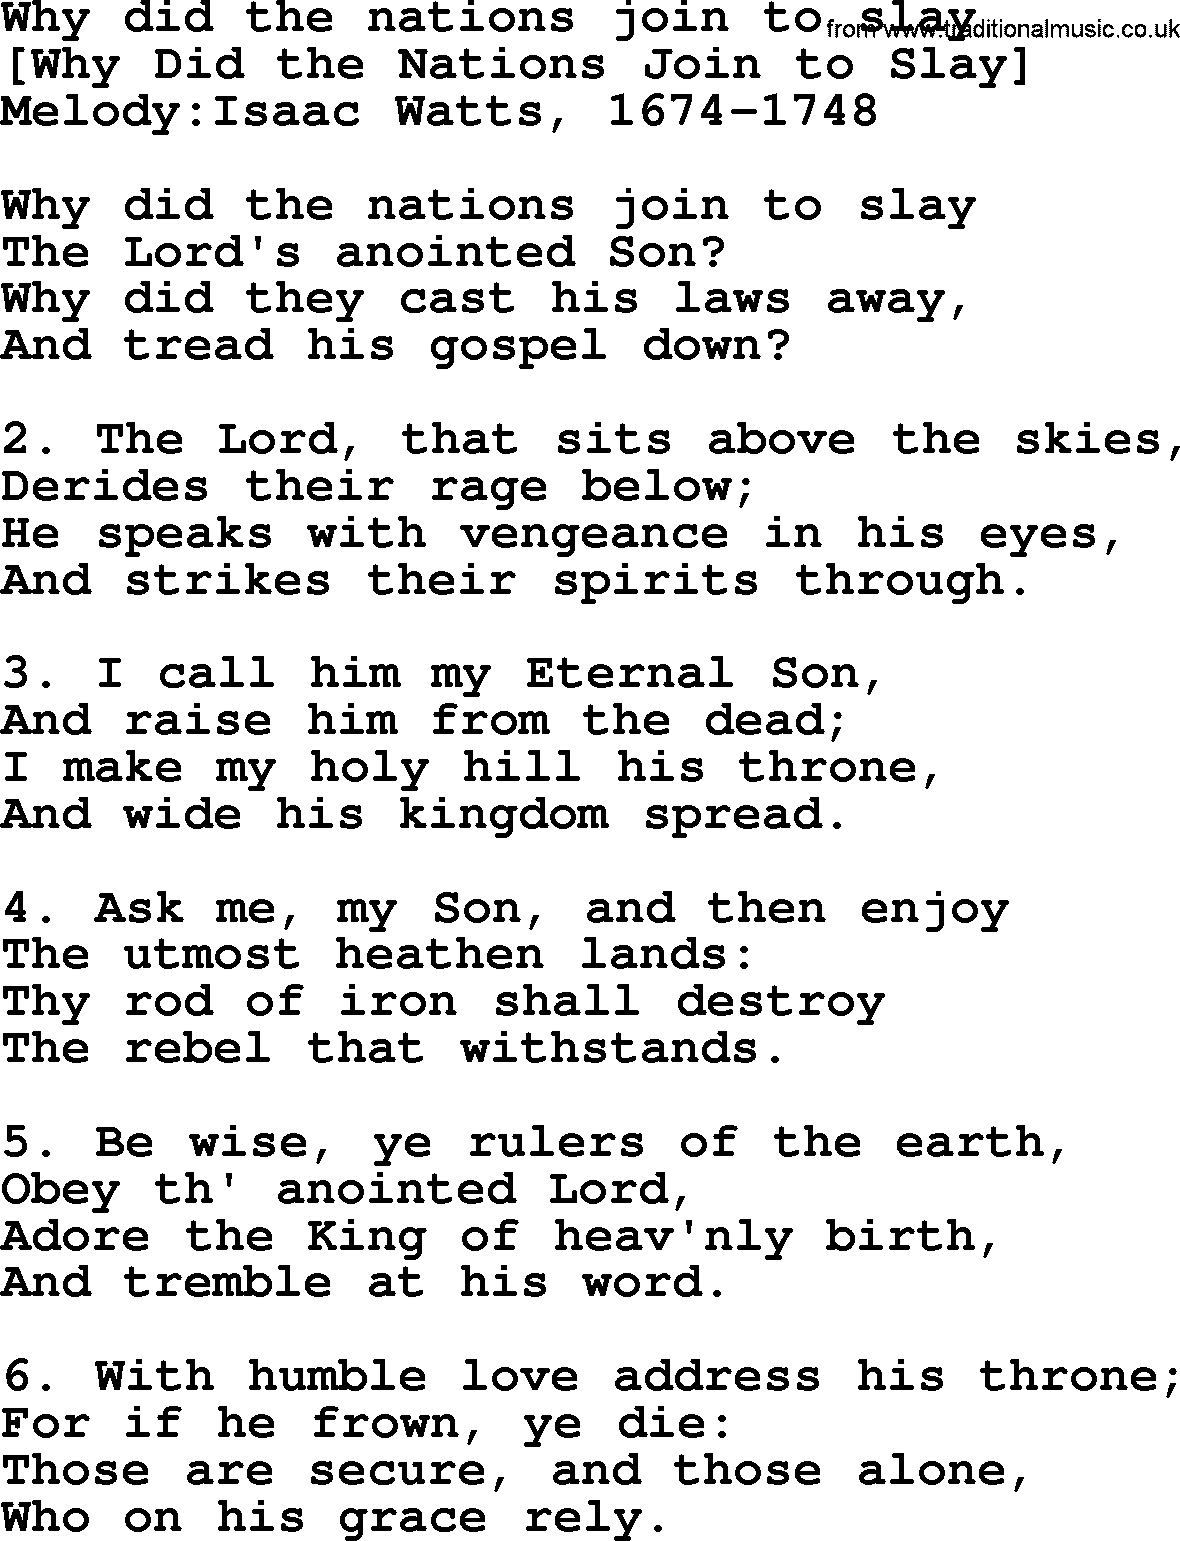 Old English Song: Why Did The Nations Join To Slay lyrics